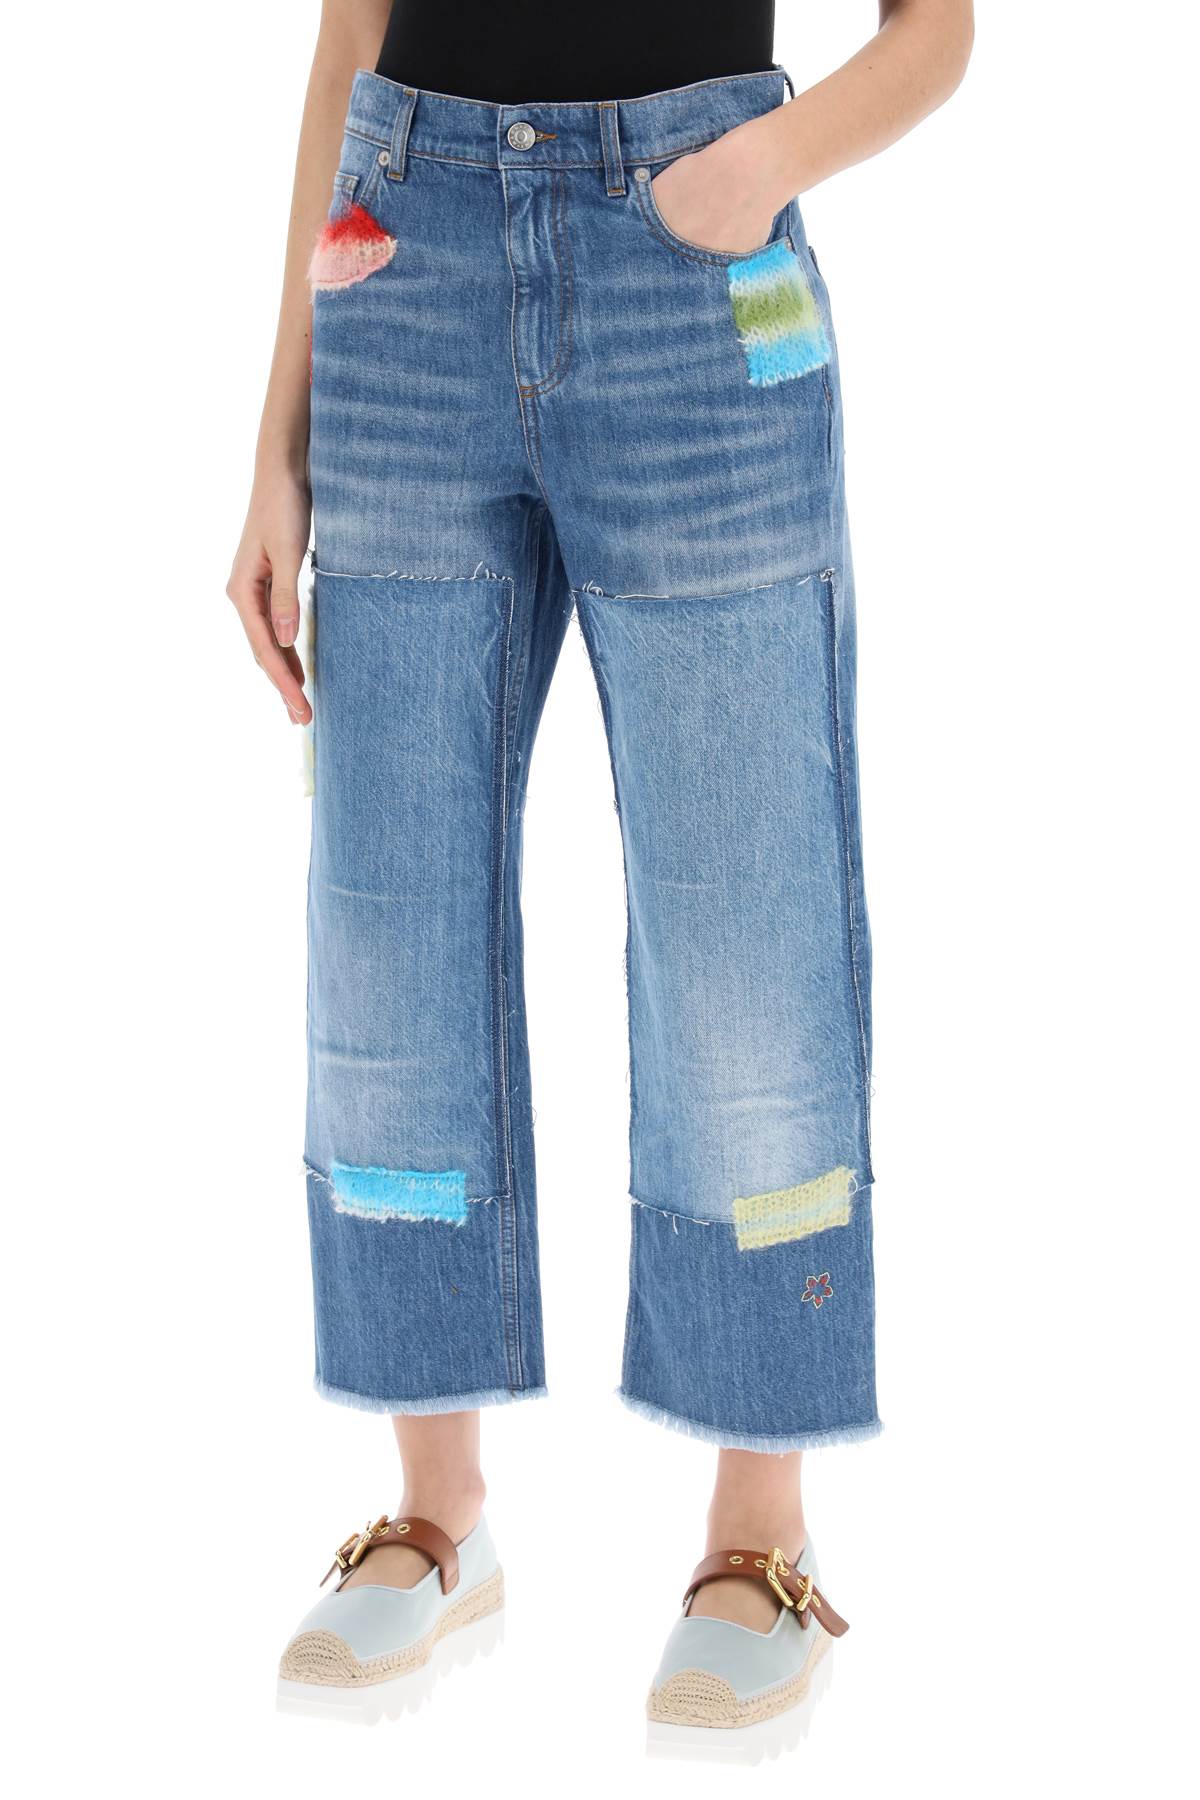 Marni Cropped Jeans With Mohair Inserts Blue